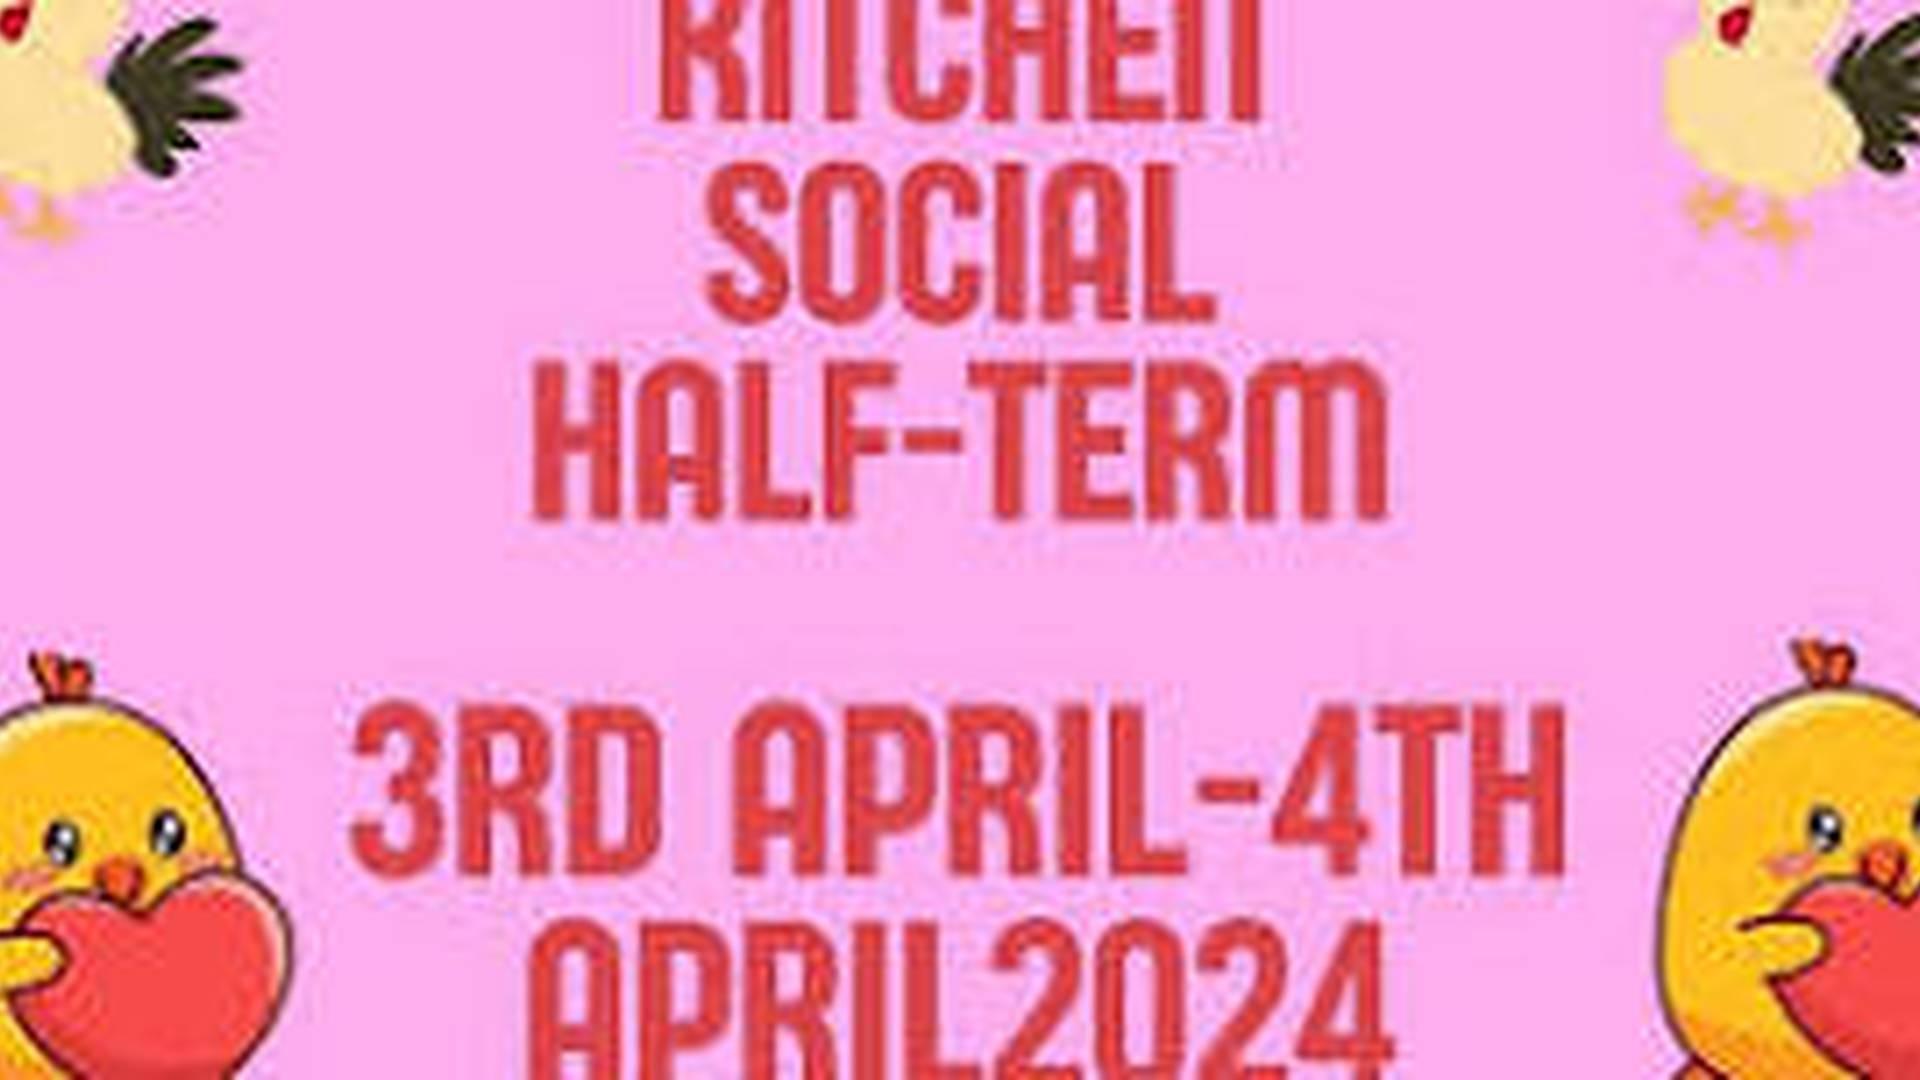 Easter Kitchen Social Special photo